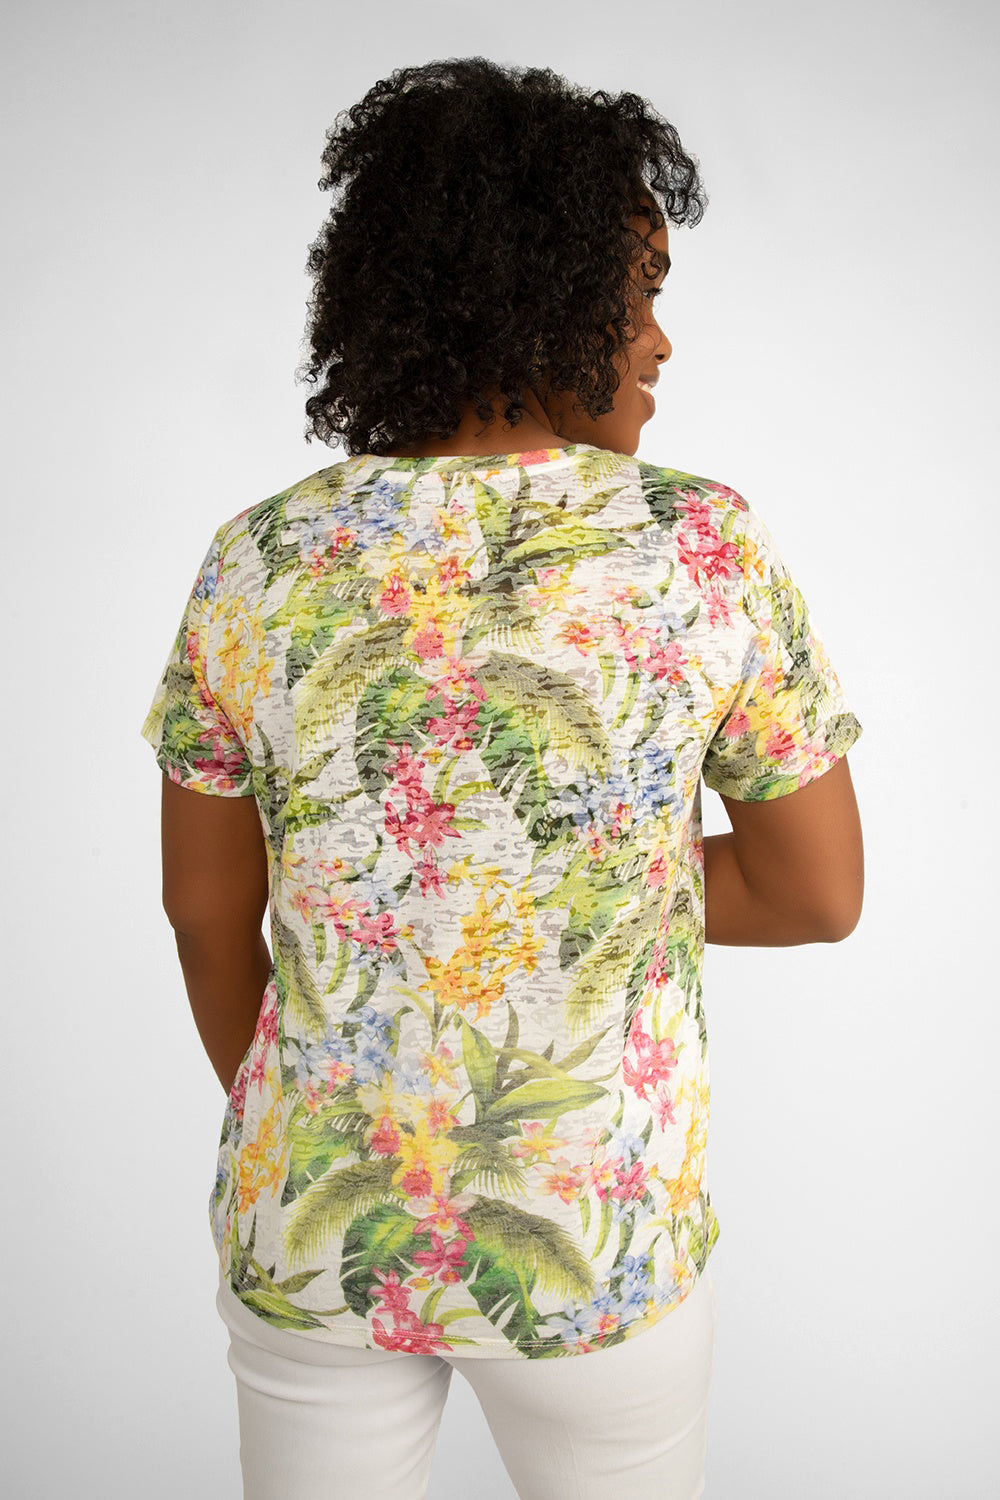 Back view of Carre Noir (6967) women's Short Sleeve Tropical Floral Printed T-shirt